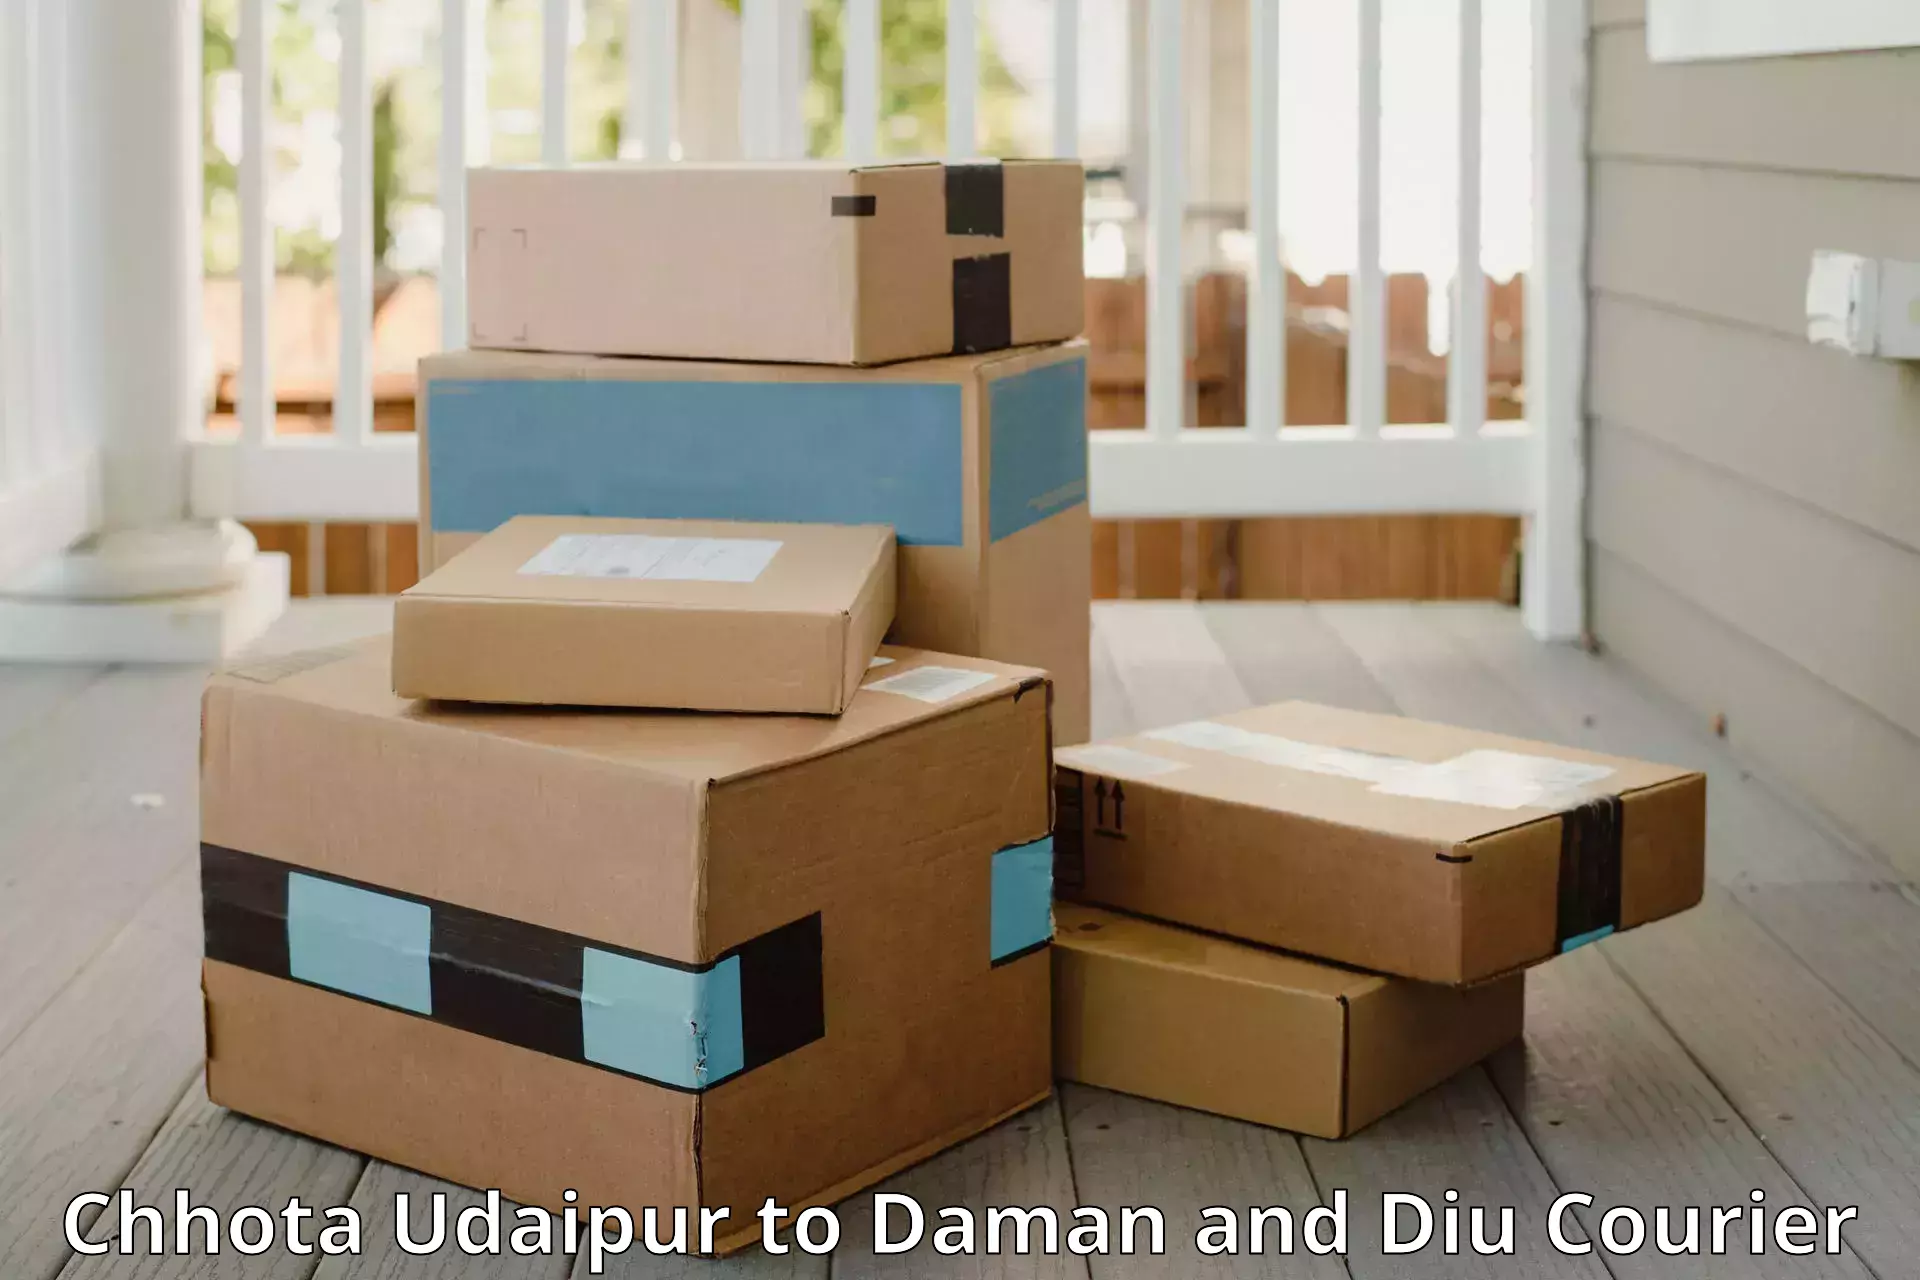 Baggage delivery support Chhota Udaipur to Diu